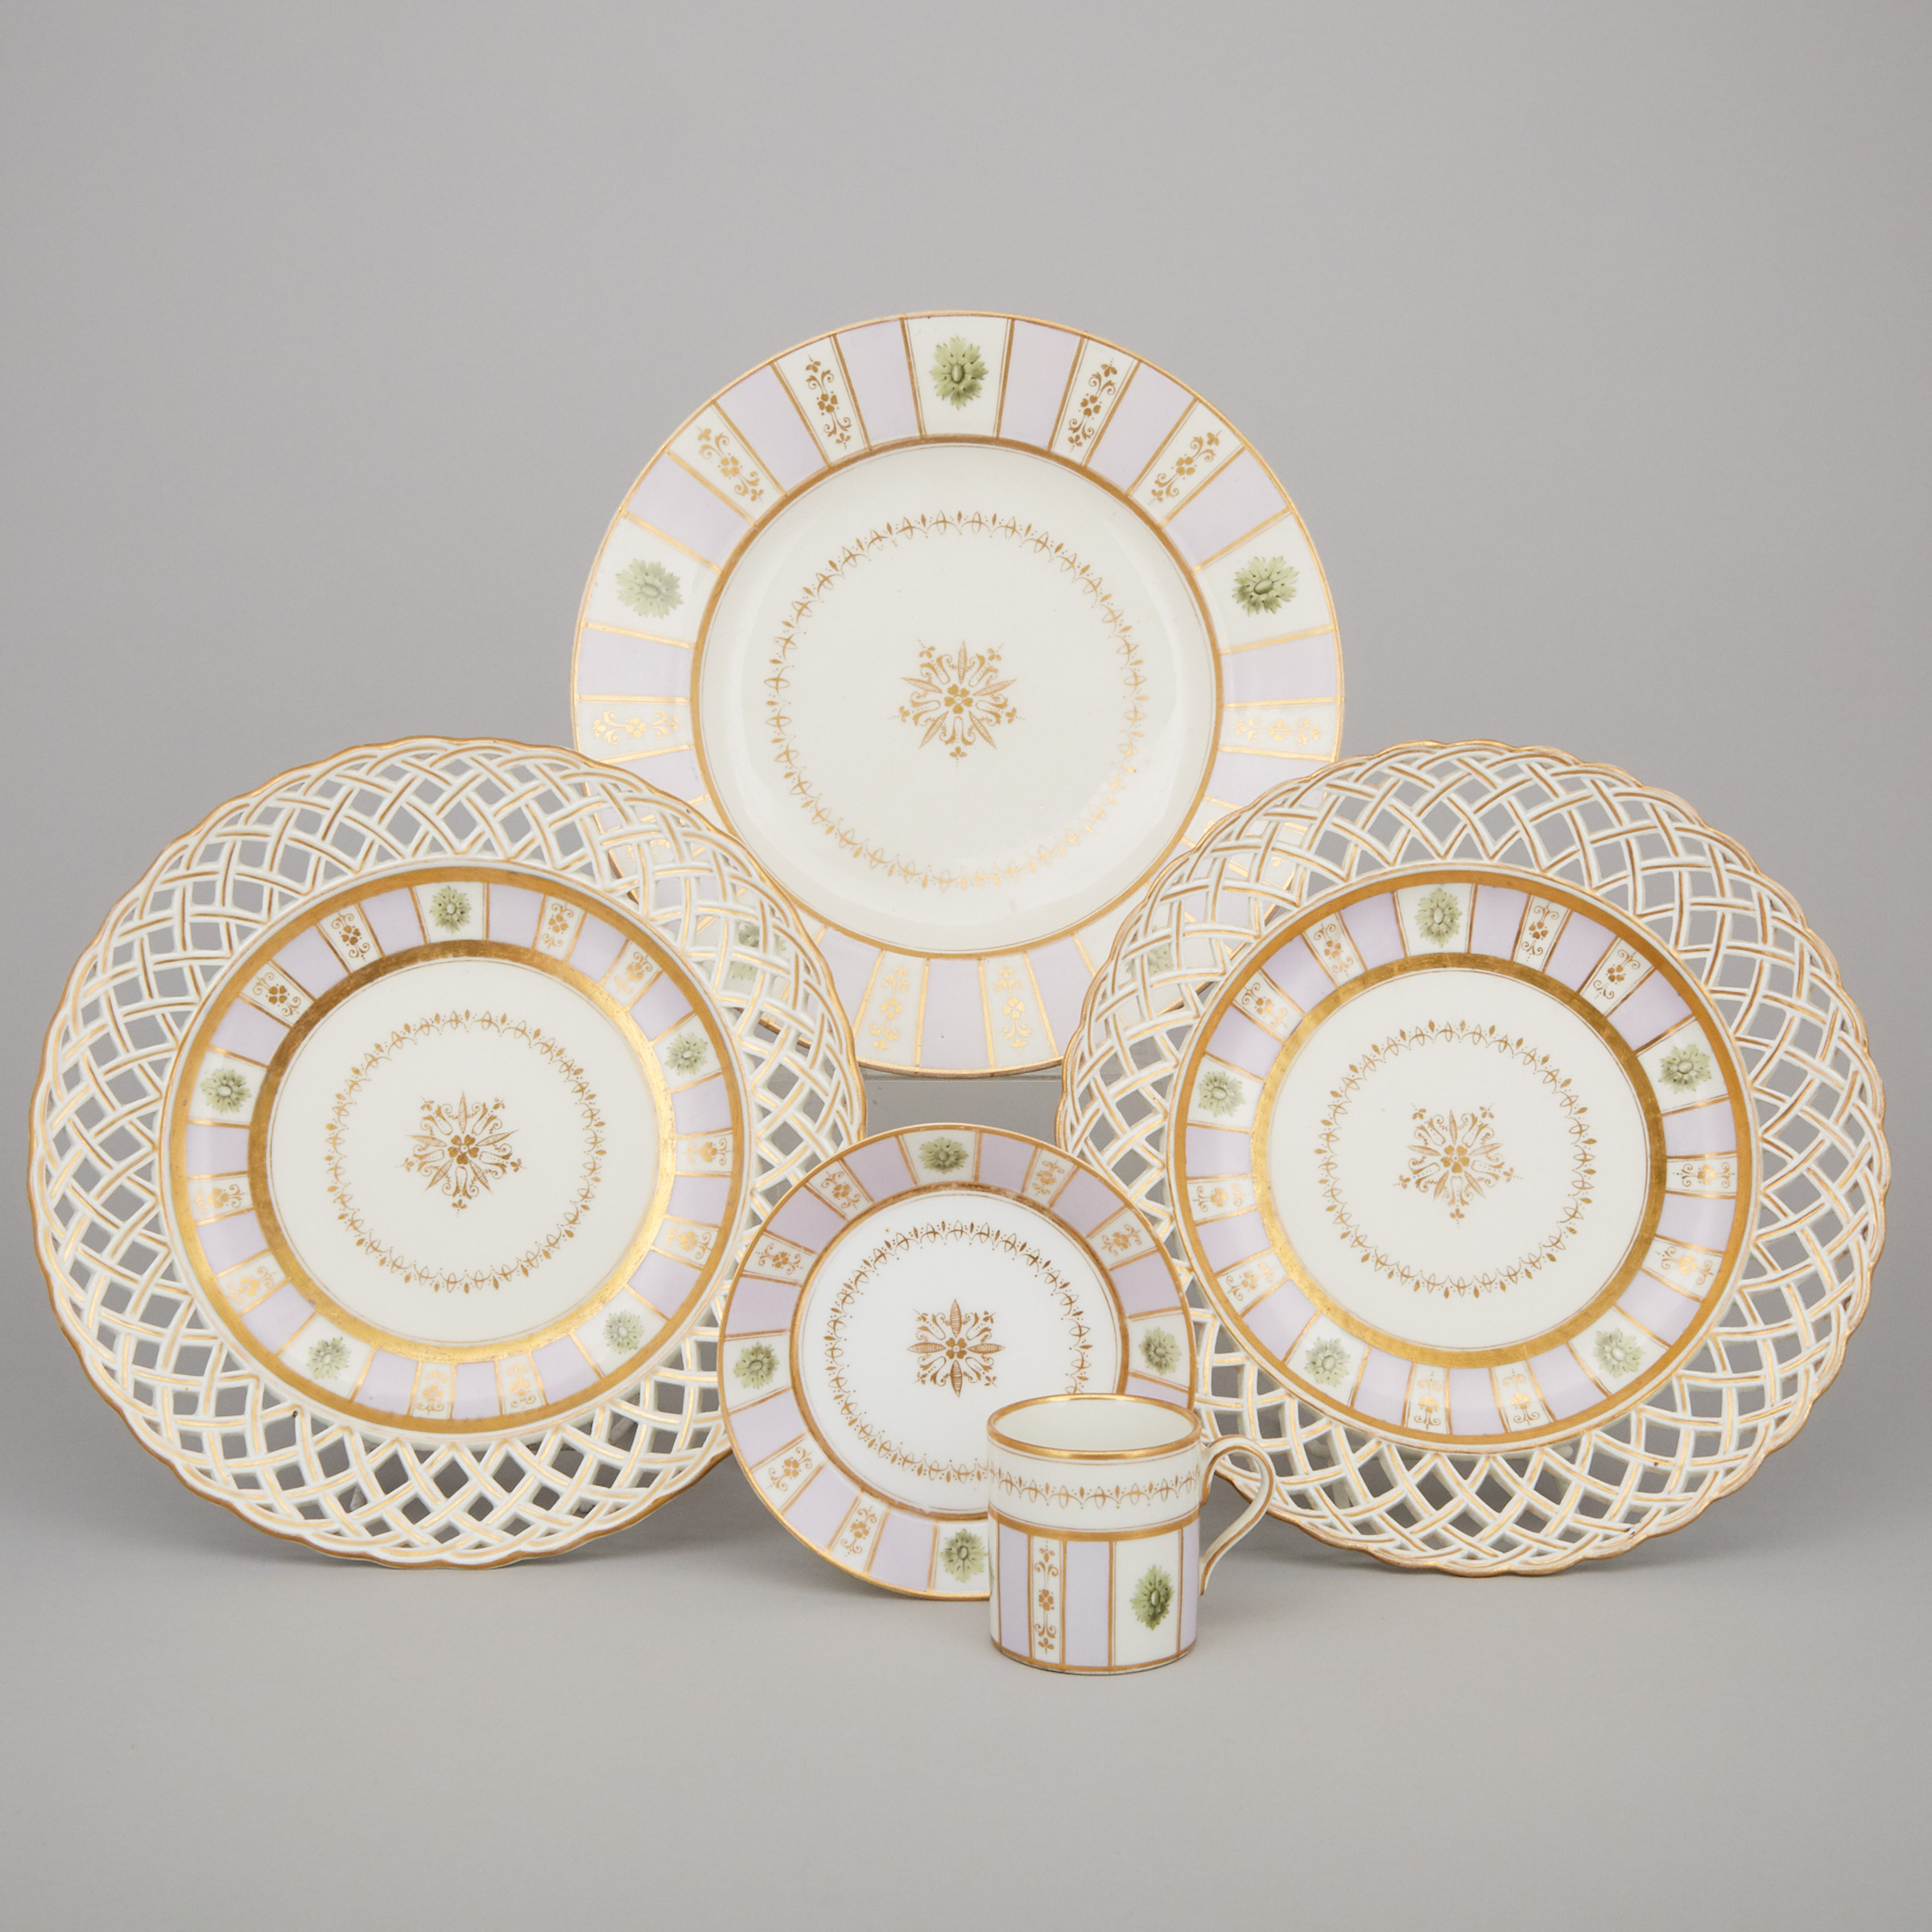 Three Vienna Plates and a Coffee Cup and Saucer, Gottfried Anreiter, c.1797-1825